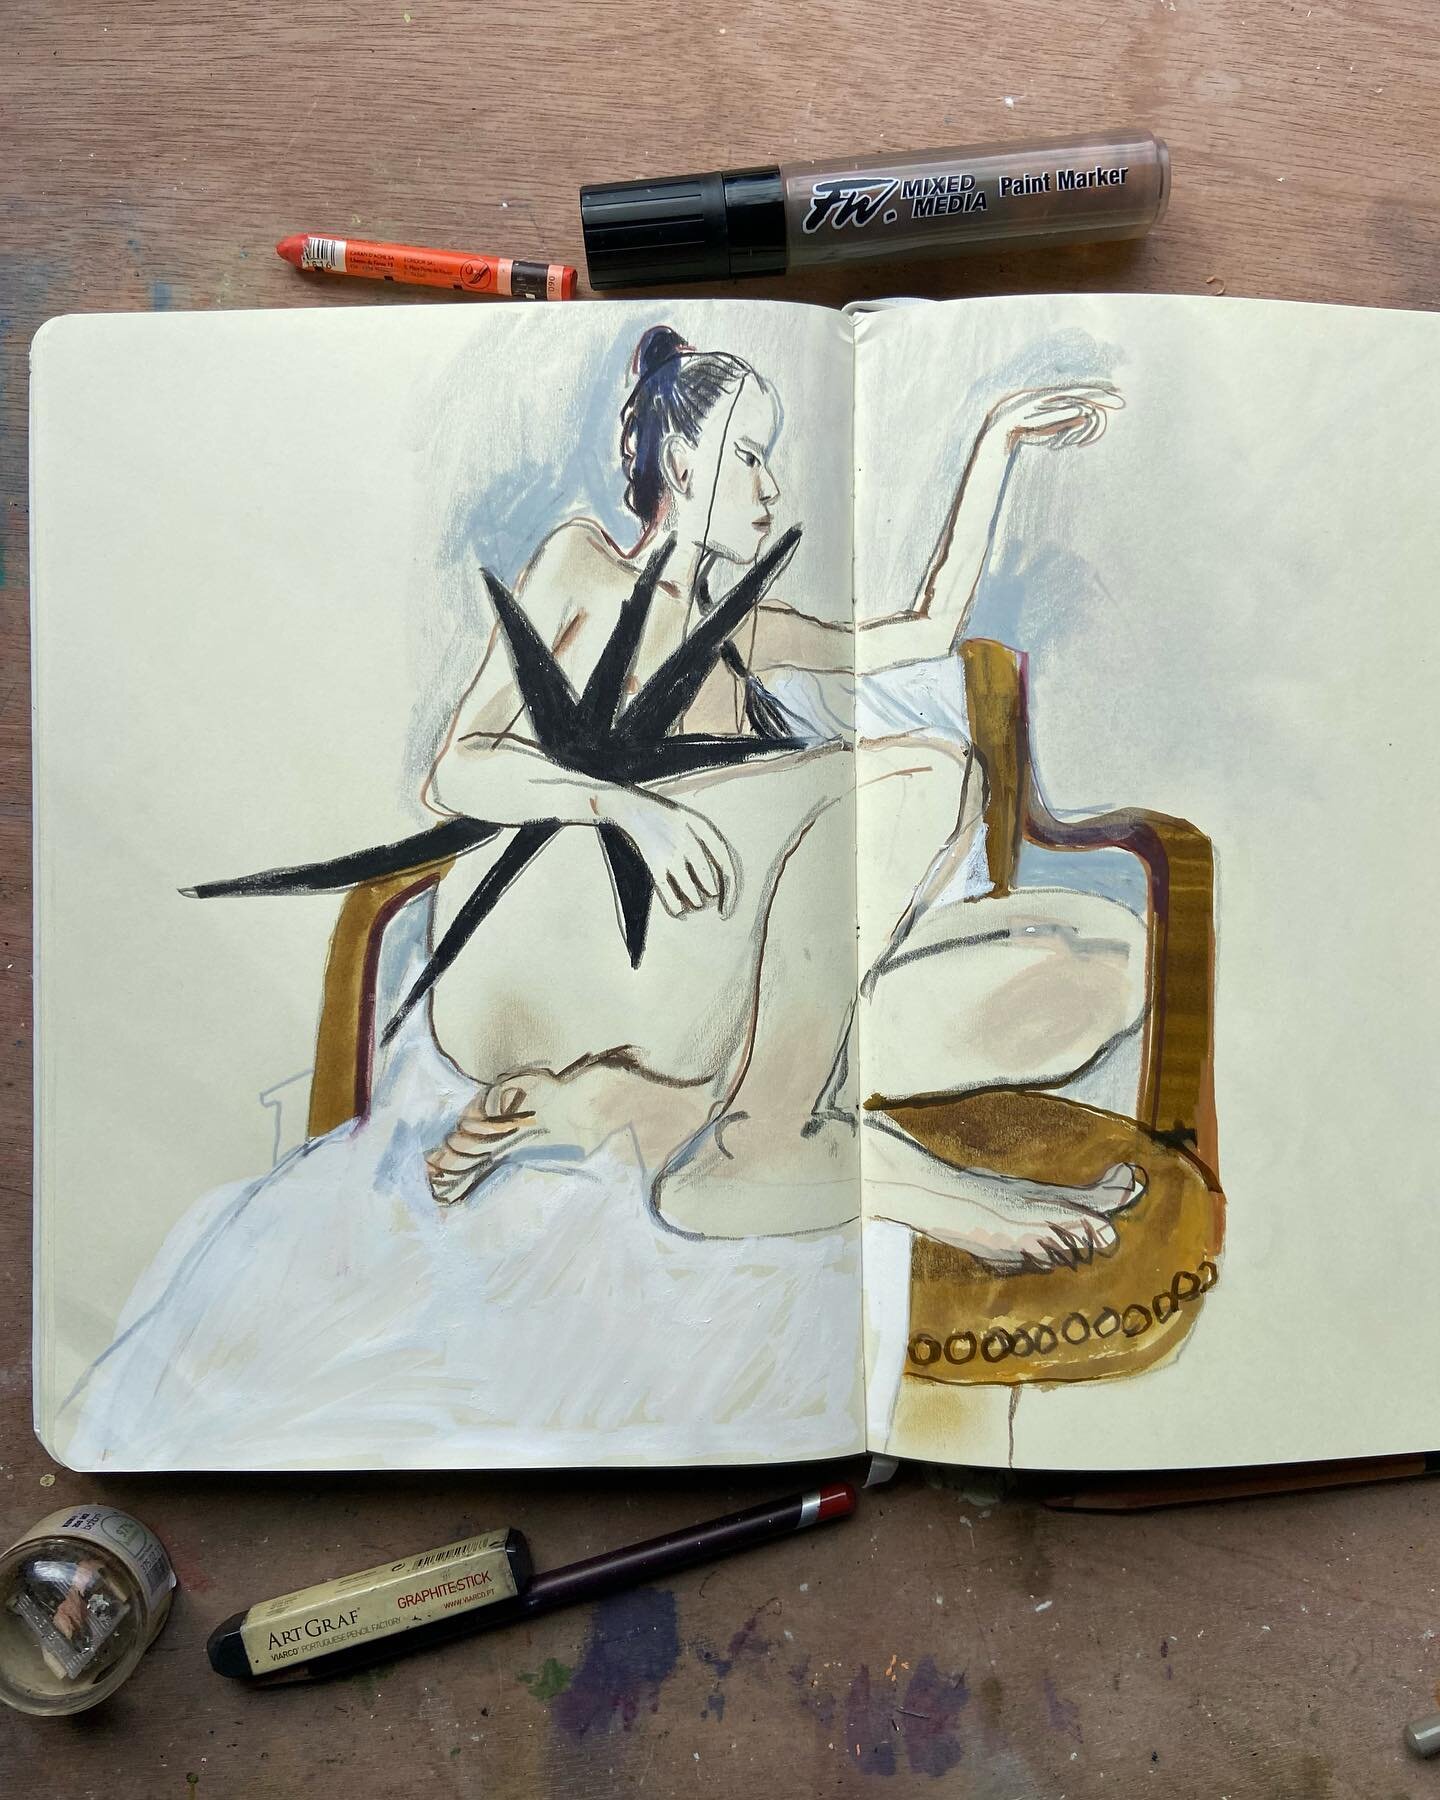 Some recent life drawing I&rsquo;ve really enjoyed. All sessions from the wonderful @draw_brighton Still finding it incredibly beneficial to my illustration practice.
.
.
.

#lifedrawingmodel #lifedrawing #sketchbook #drawdaily #dailyillustration #sk